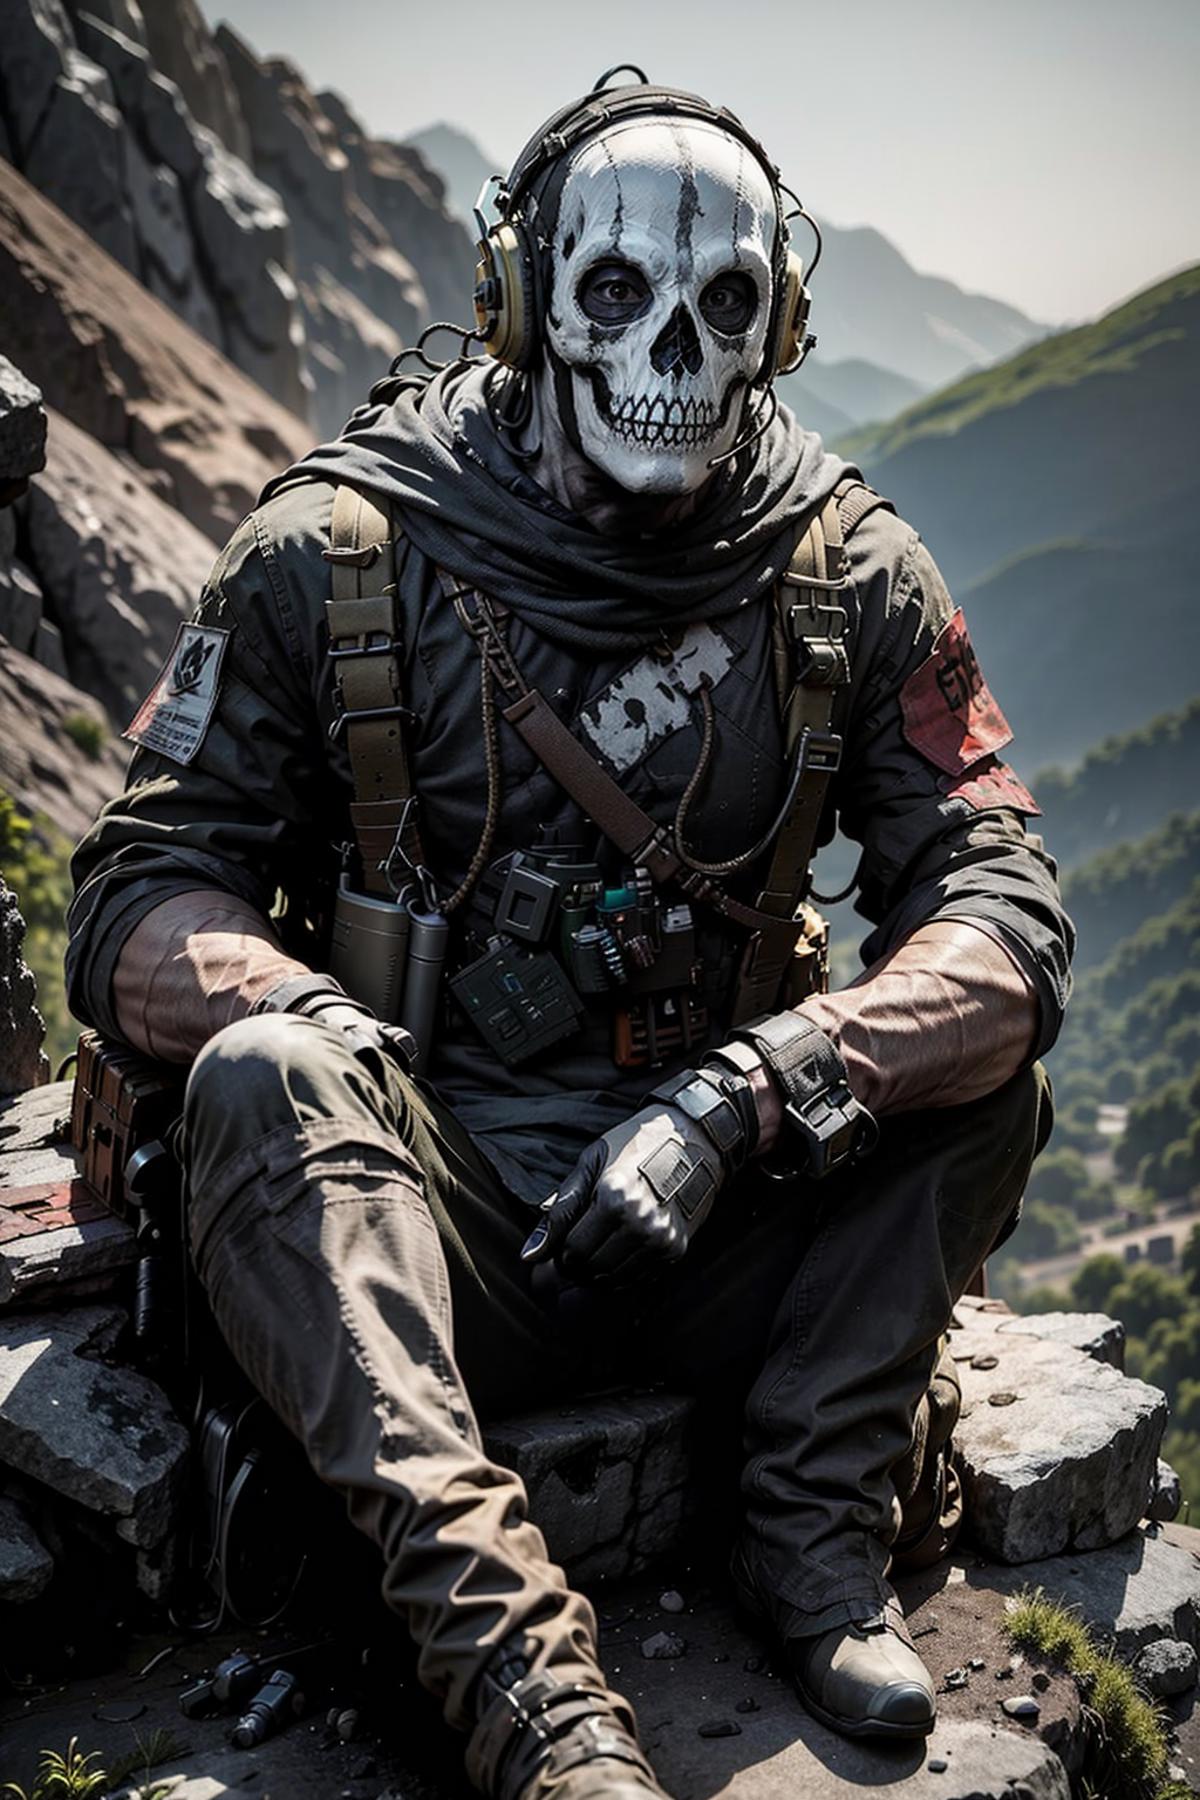 Ghost (Call of Duty) image by LDWorksDervlex